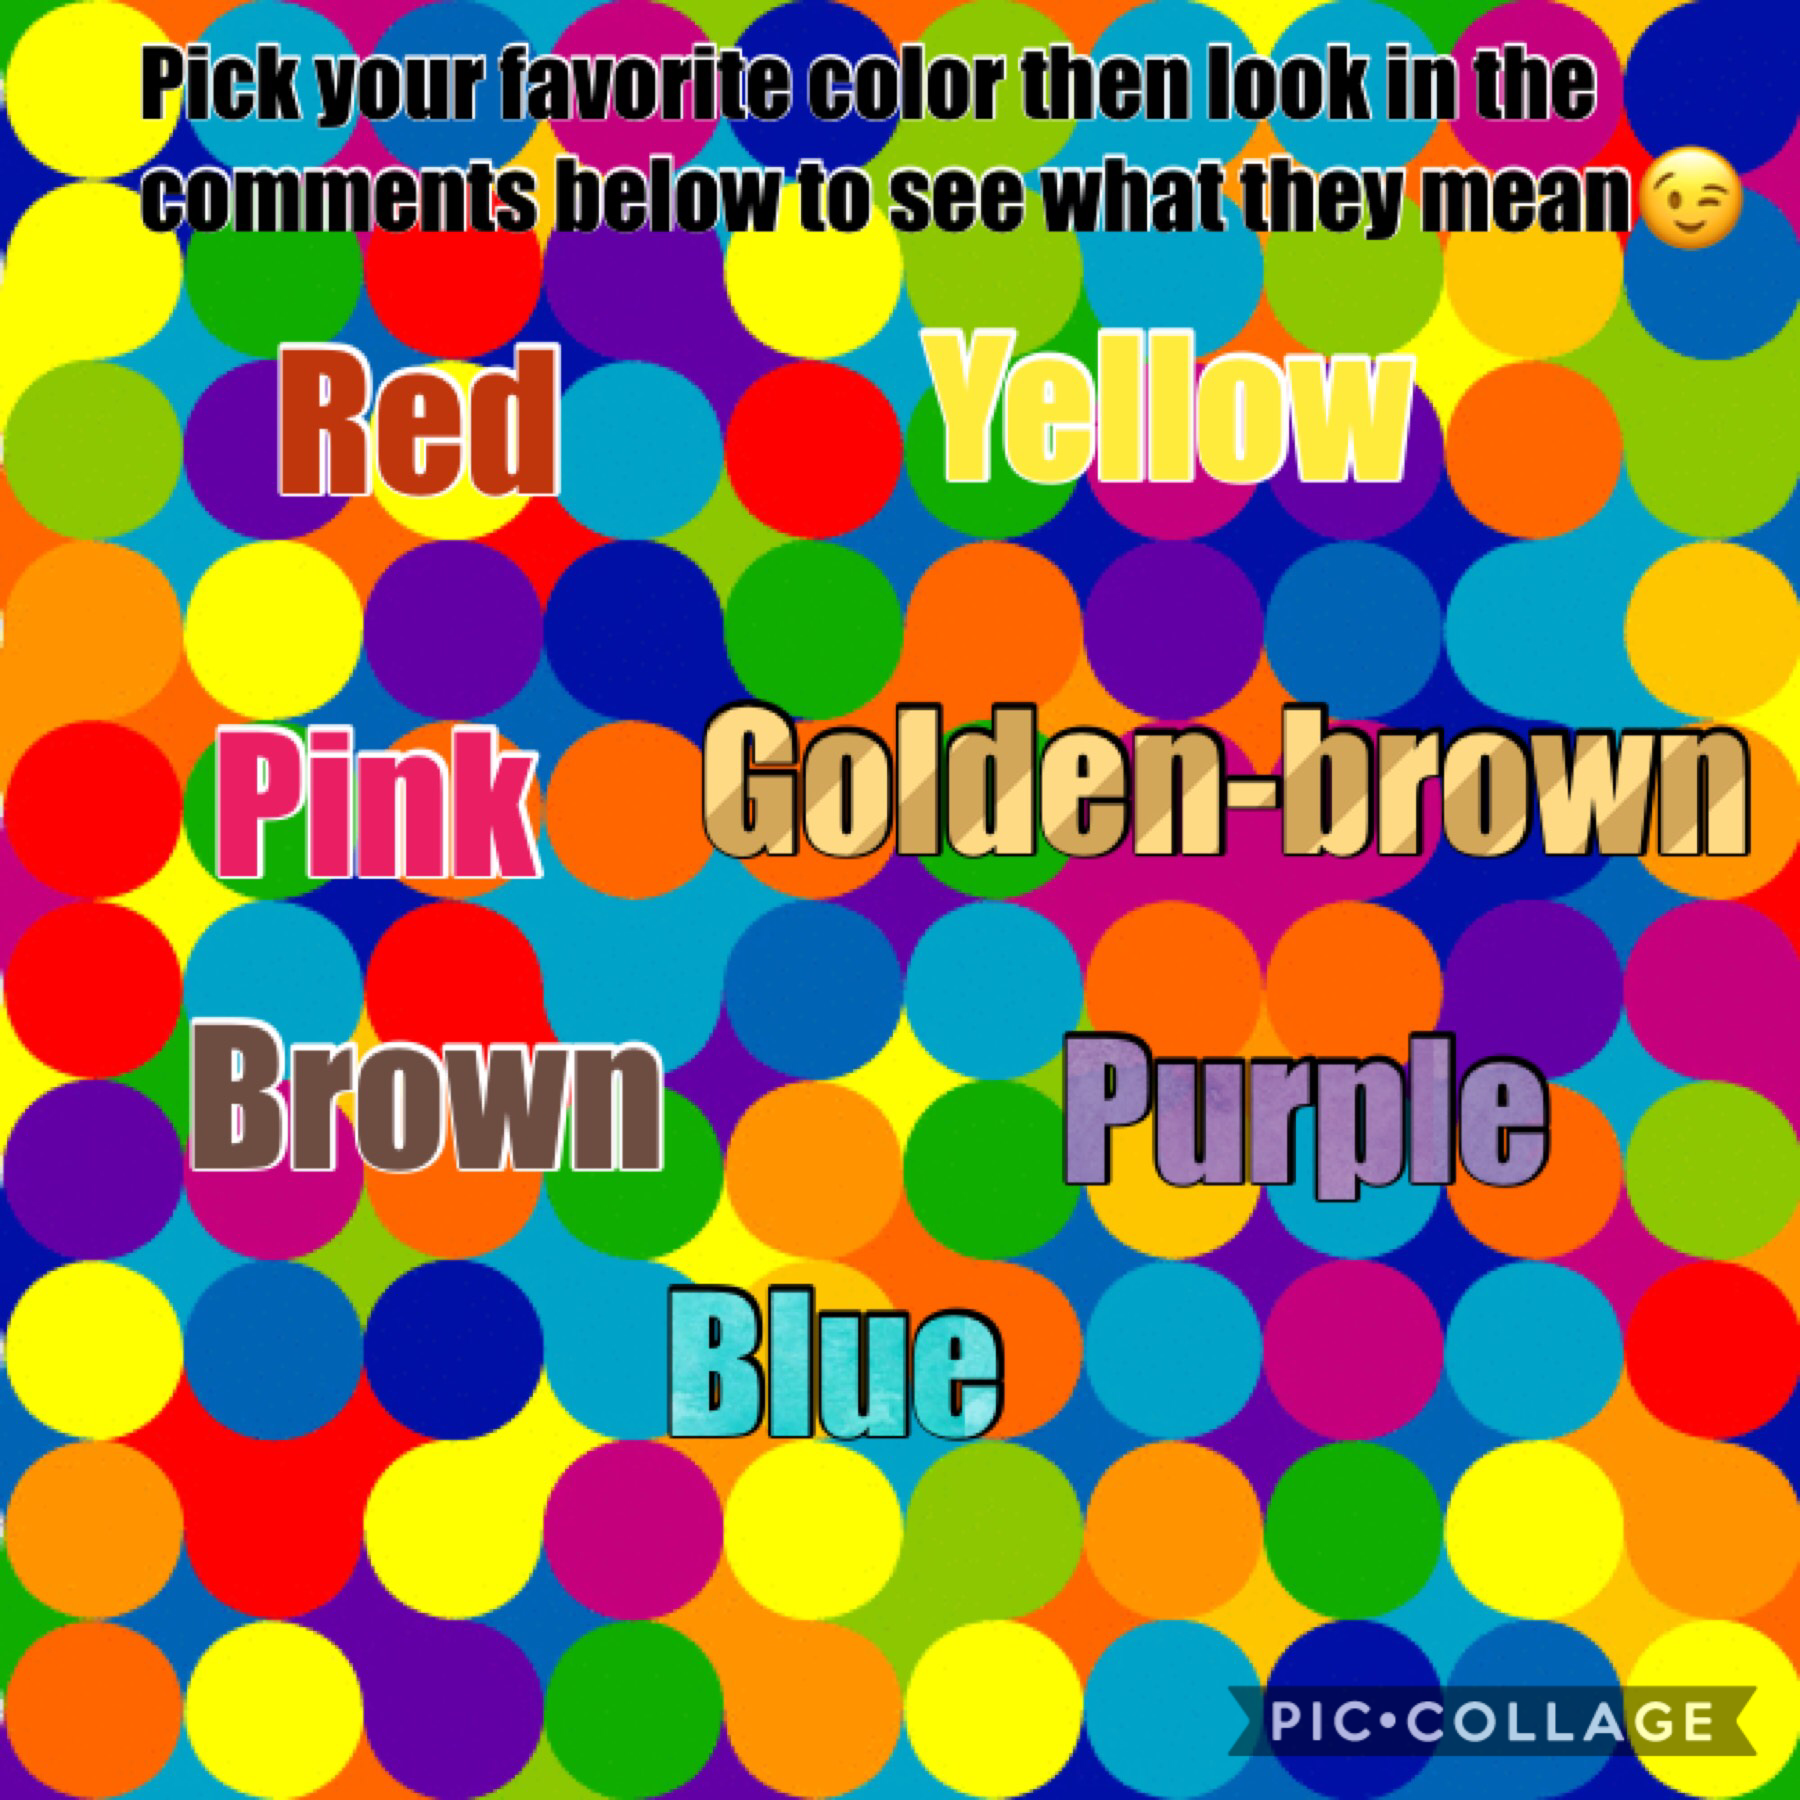 🌈Tappity Tap Tap🌈





Red-Steve.      Yellow-Darry
Pink-Johnny.  Brown-Dally
Golden Brown(or just gold)-Ponyboy
Purple- Sodapop
Blue-Two Bit


Let me know if you think any the colors could be paired with someone else 